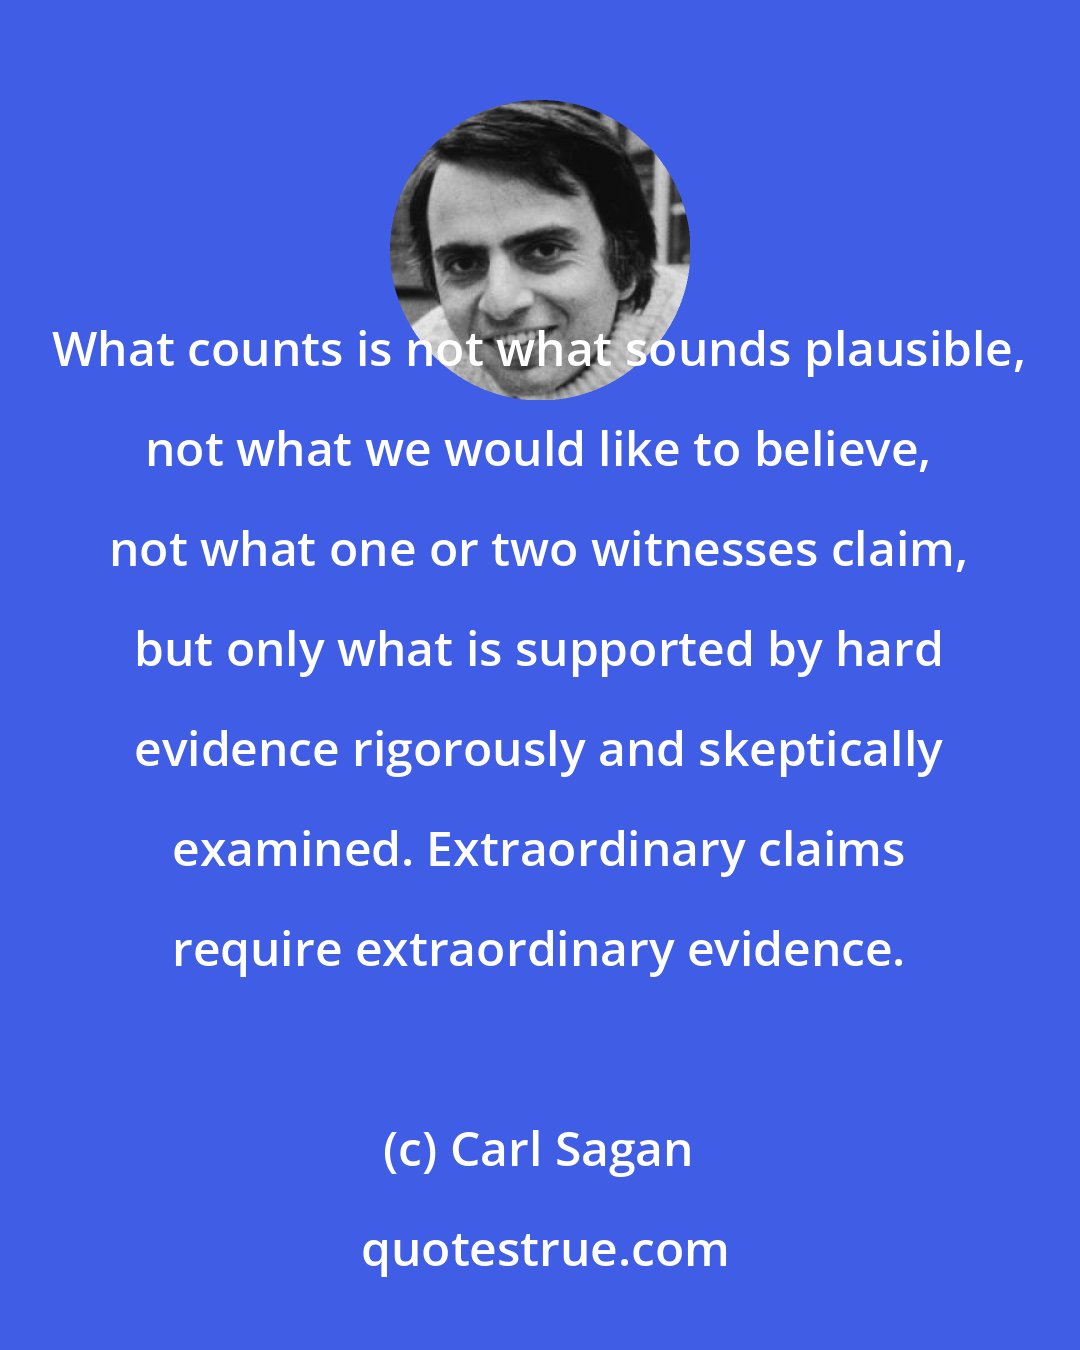 Carl Sagan: What counts is not what sounds plausible, not what we would like to believe, not what one or two witnesses claim, but only what is supported by hard evidence rigorously and skeptically examined. Extraordinary claims require extraordinary evidence.